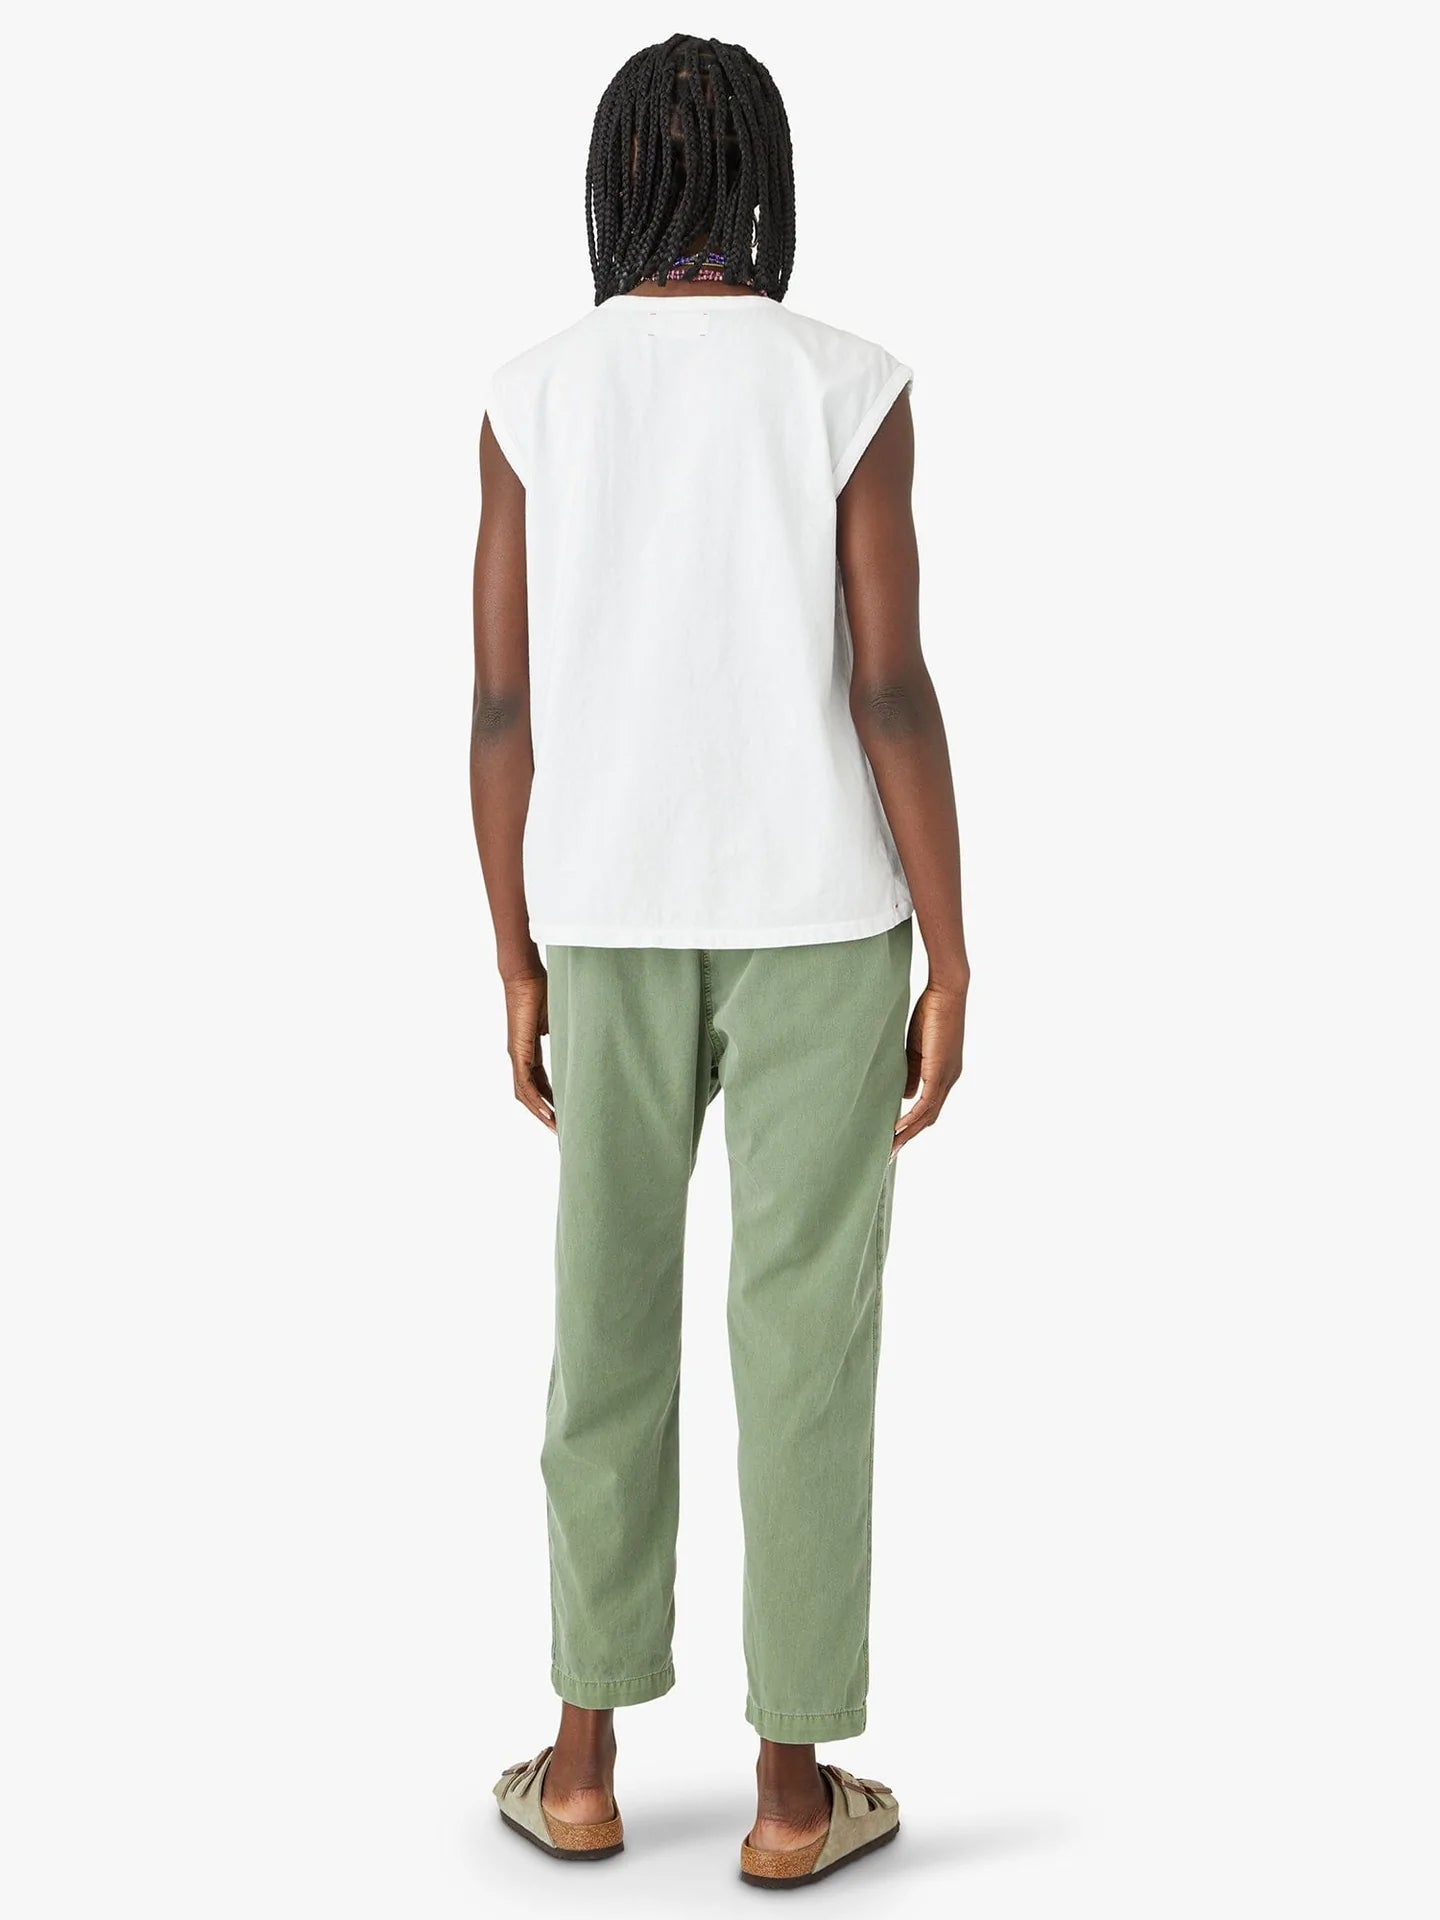 The Oxford Rex Pant - Olive Sage